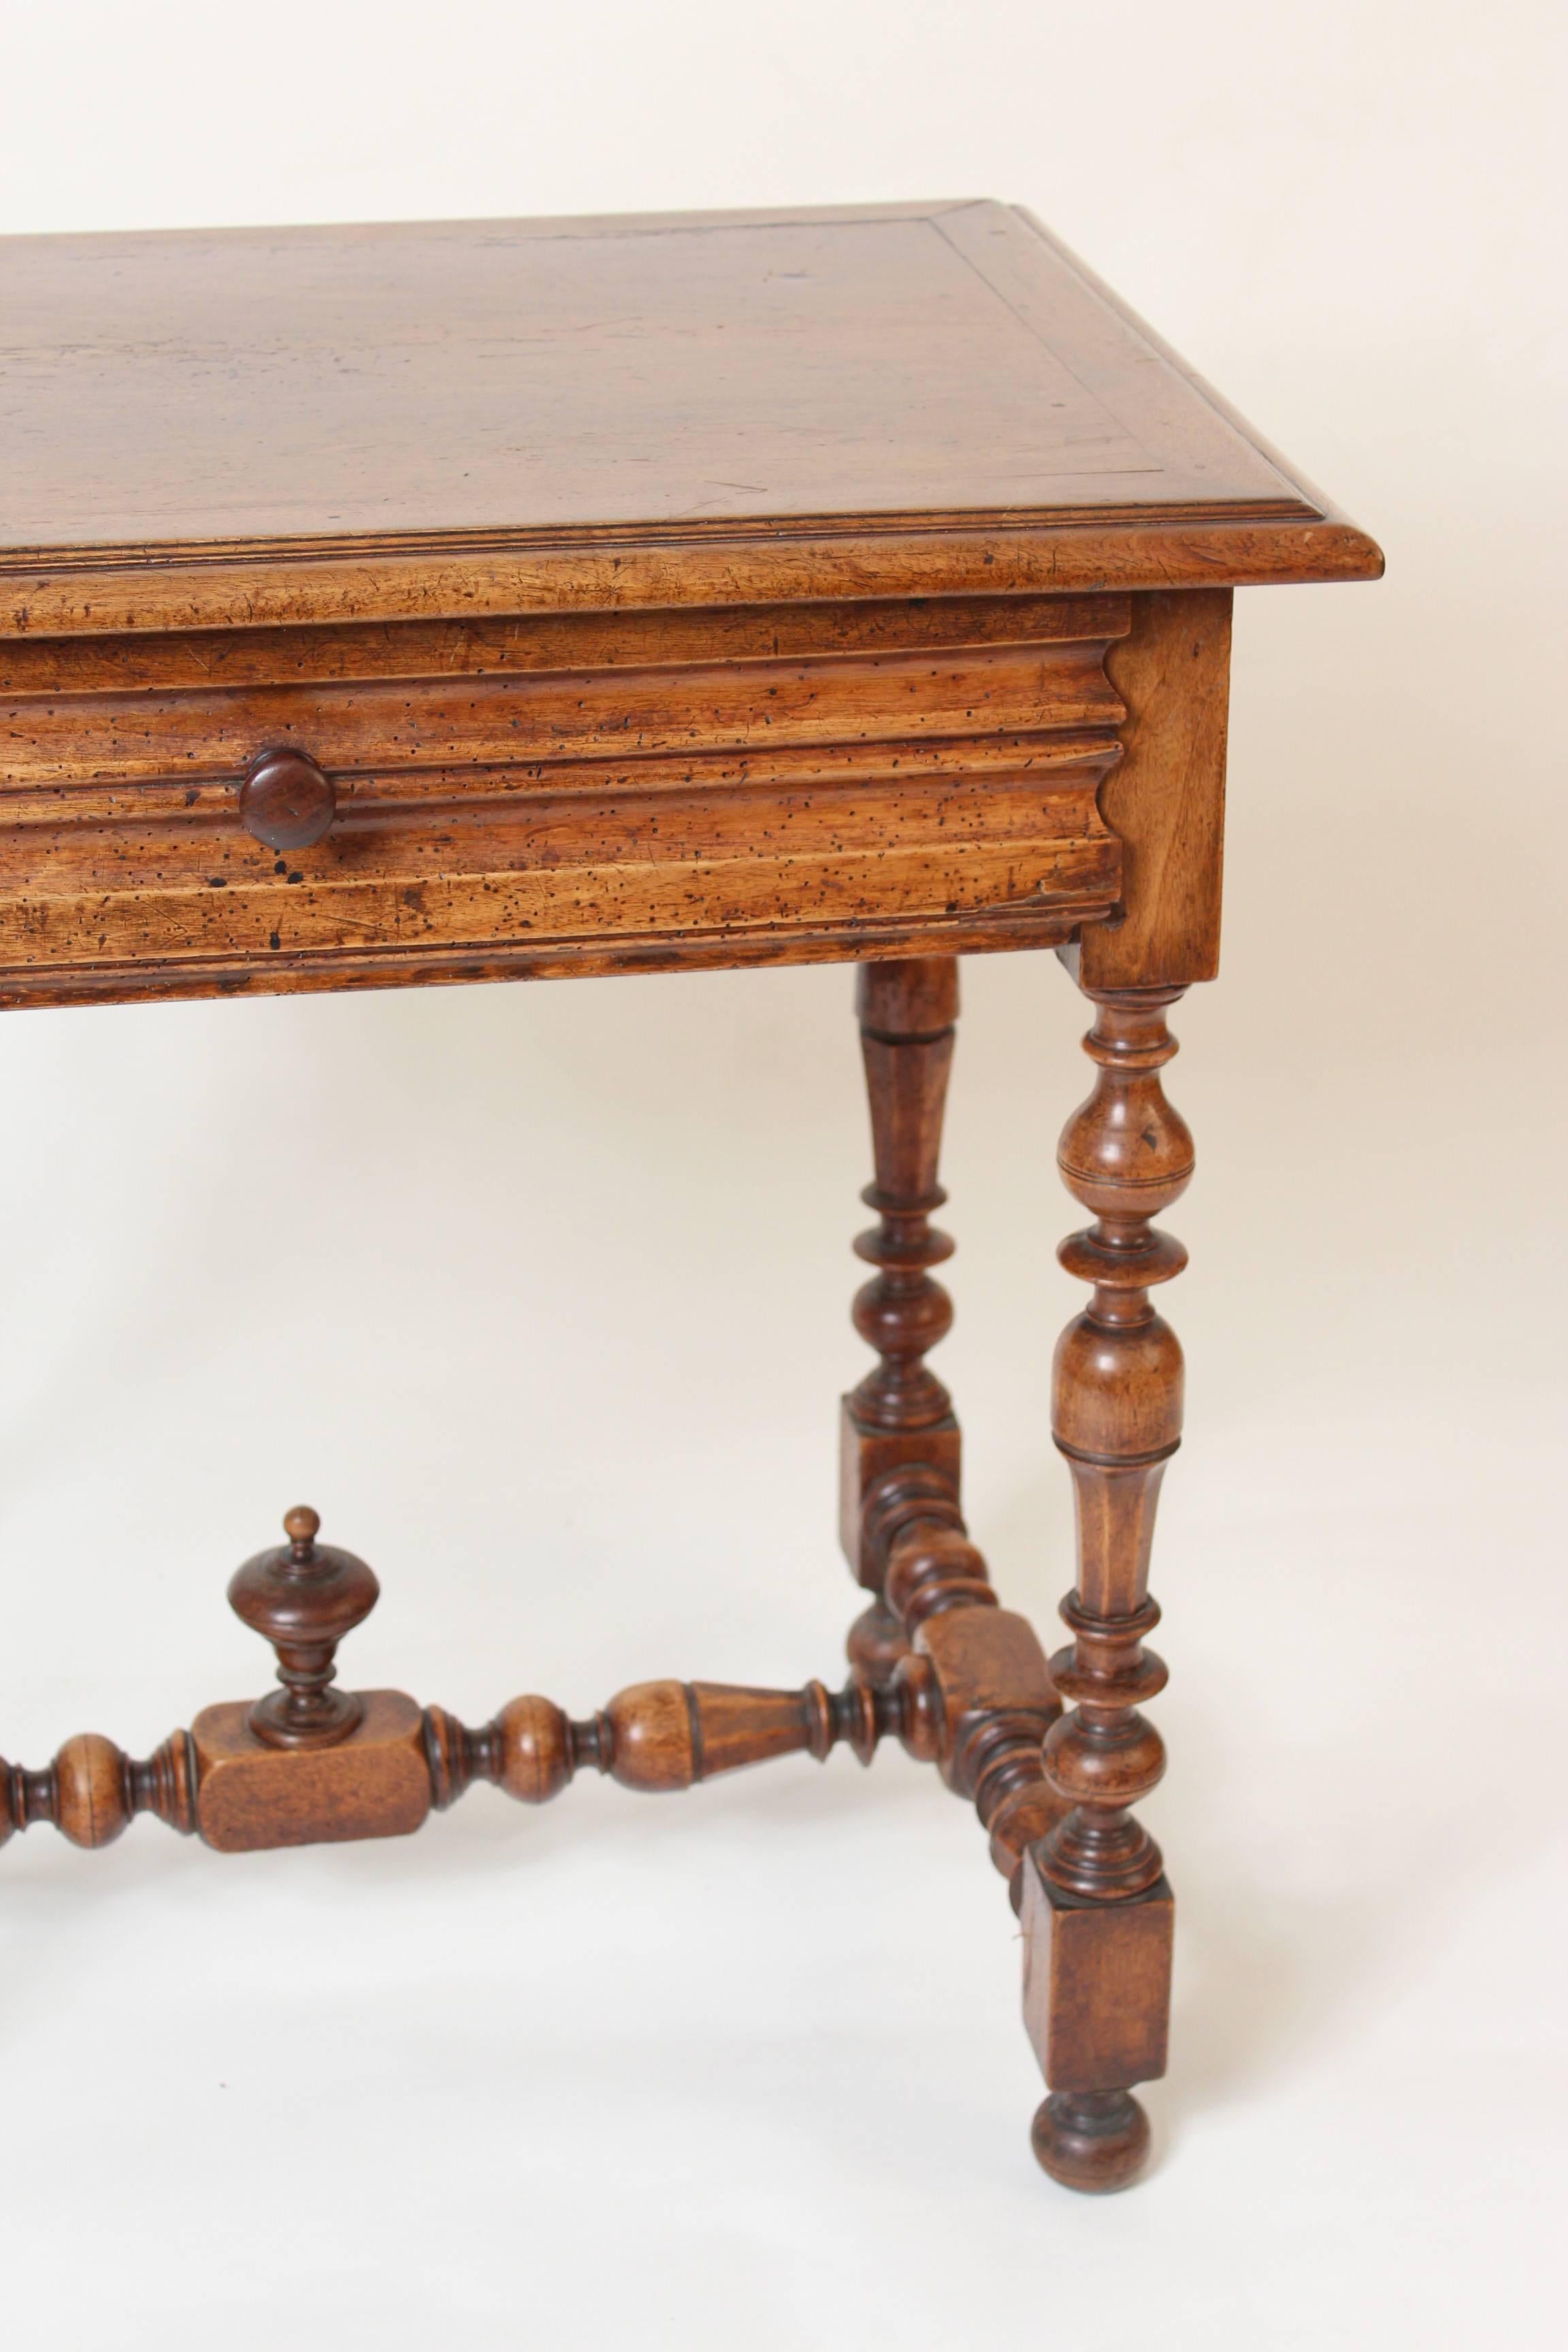 Antique Louis XIV style walnut single drawer occasional table, 19th century. Nice wood color / patina. Period construction with mortise, tenon and dowel joints.